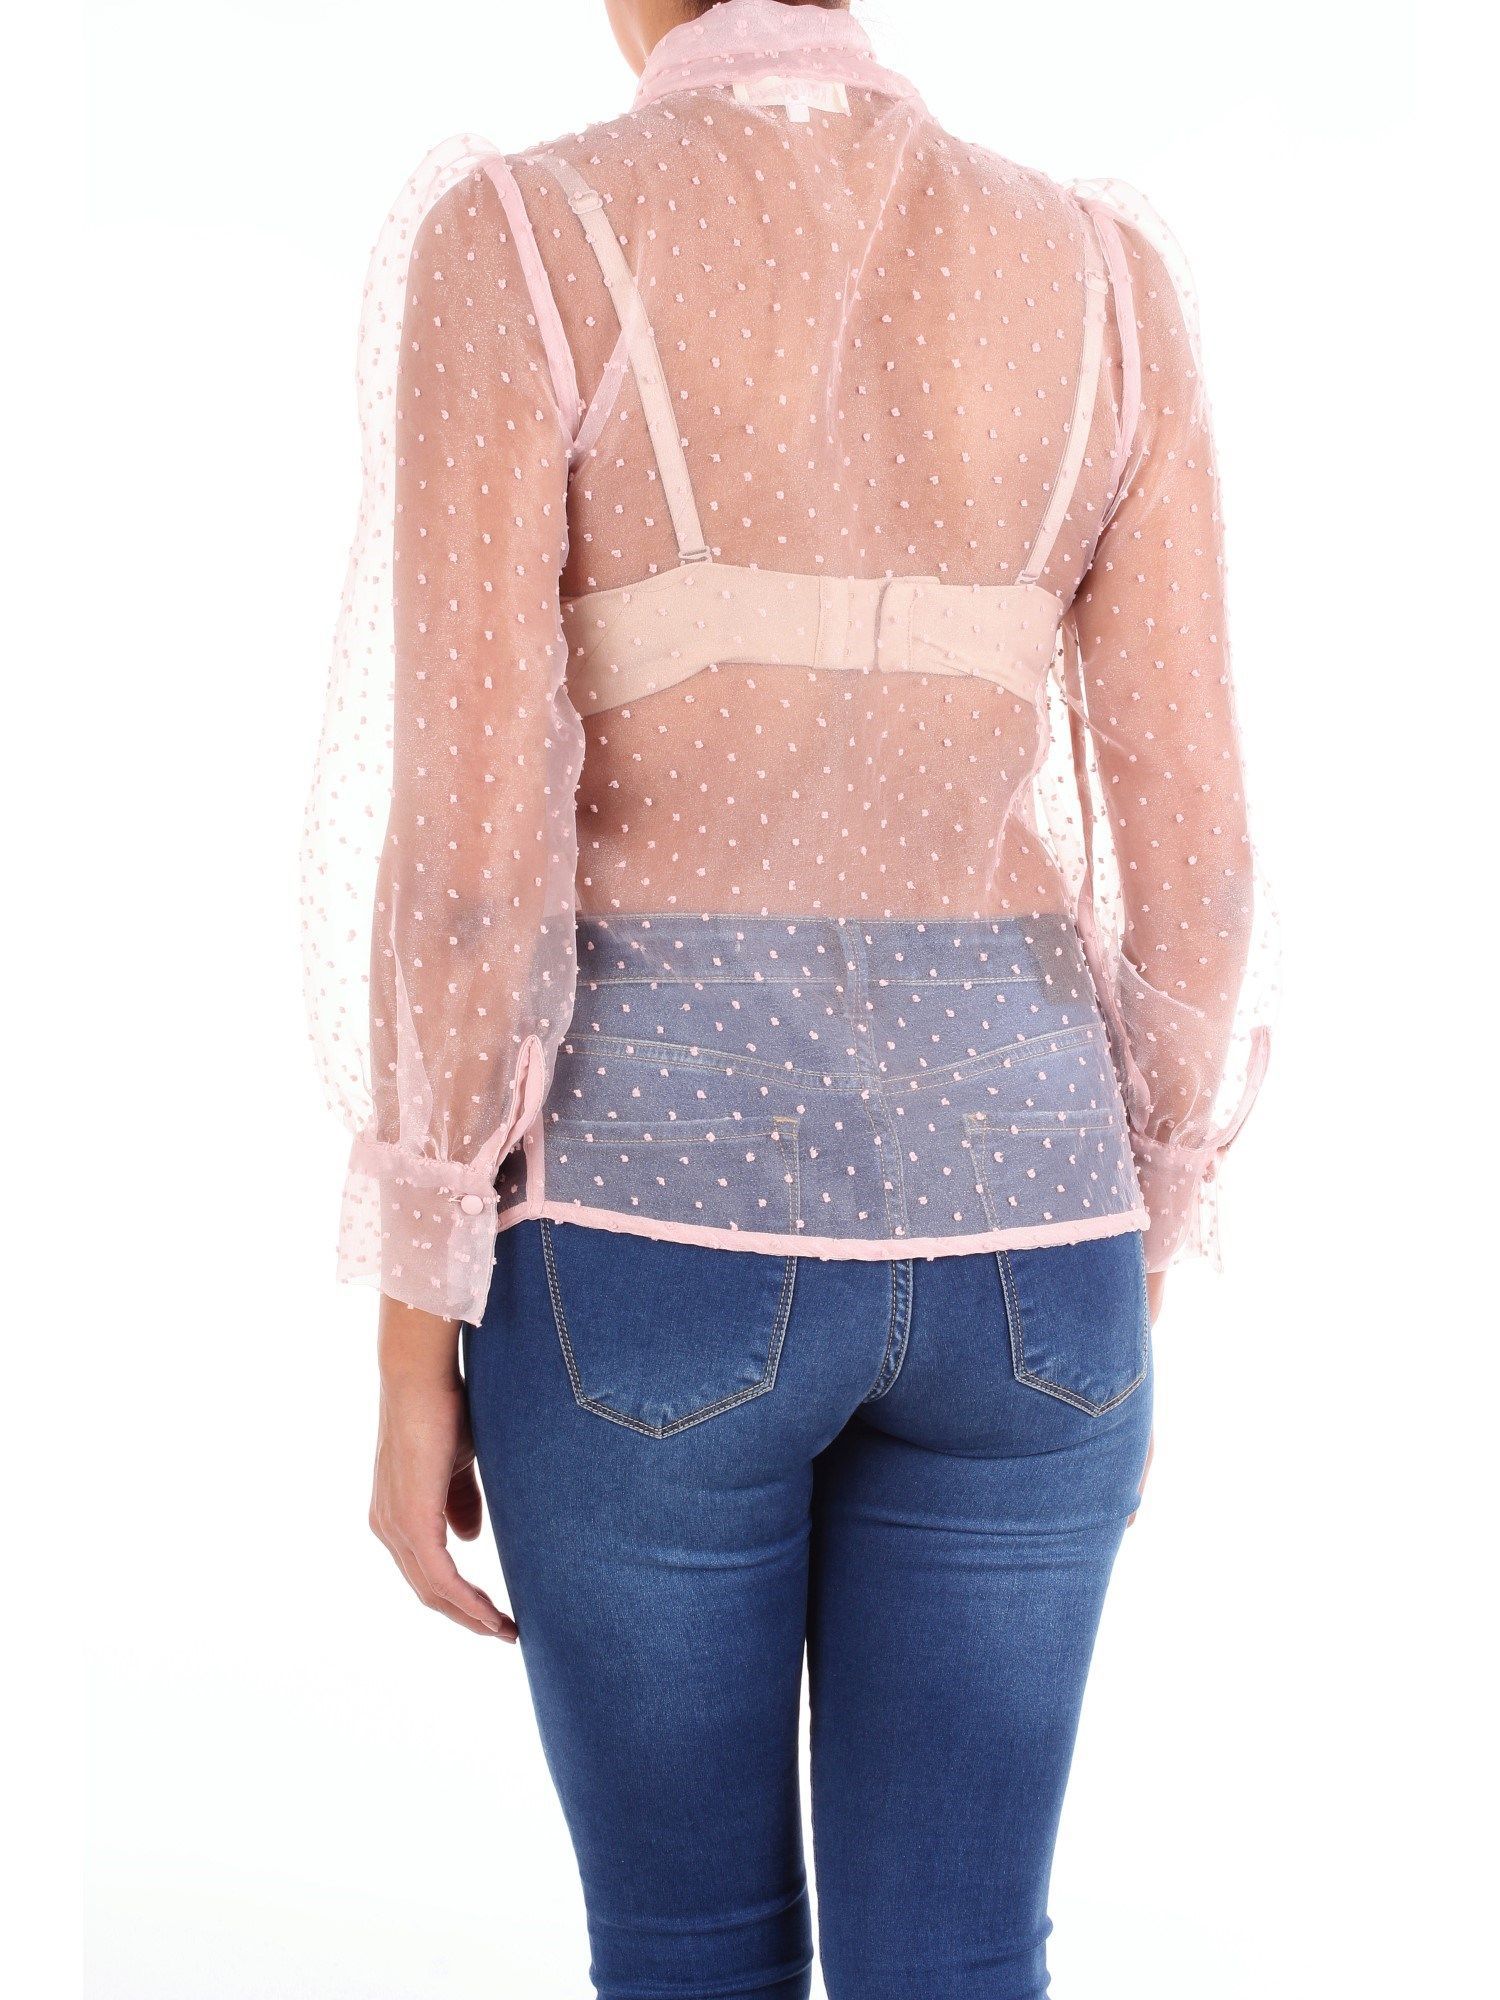 JUMPER KONTATTO, POLYESTER 100%, color PINK, Outlet, product code B3109ROSA